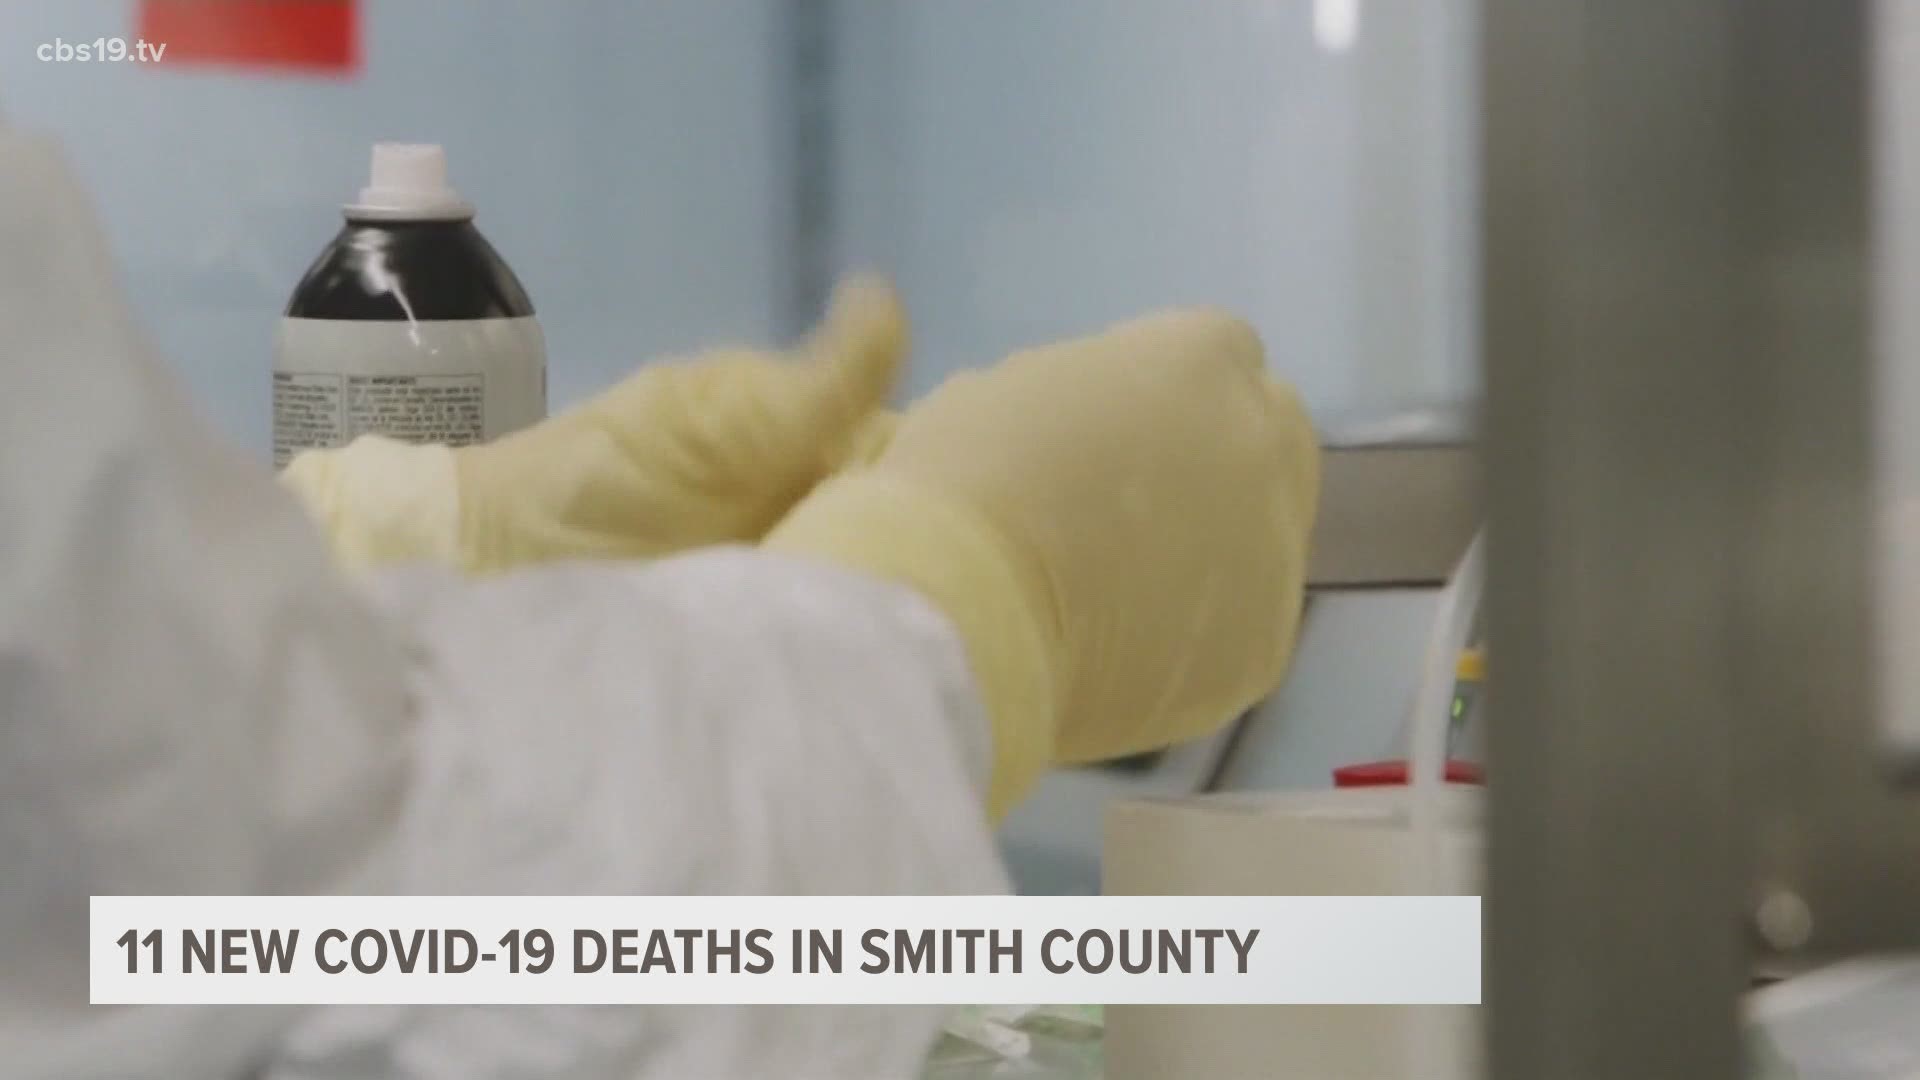 NET Health has reported 11 new coronavirus deaths in Smith County in the last two days, bringing the total to 83.